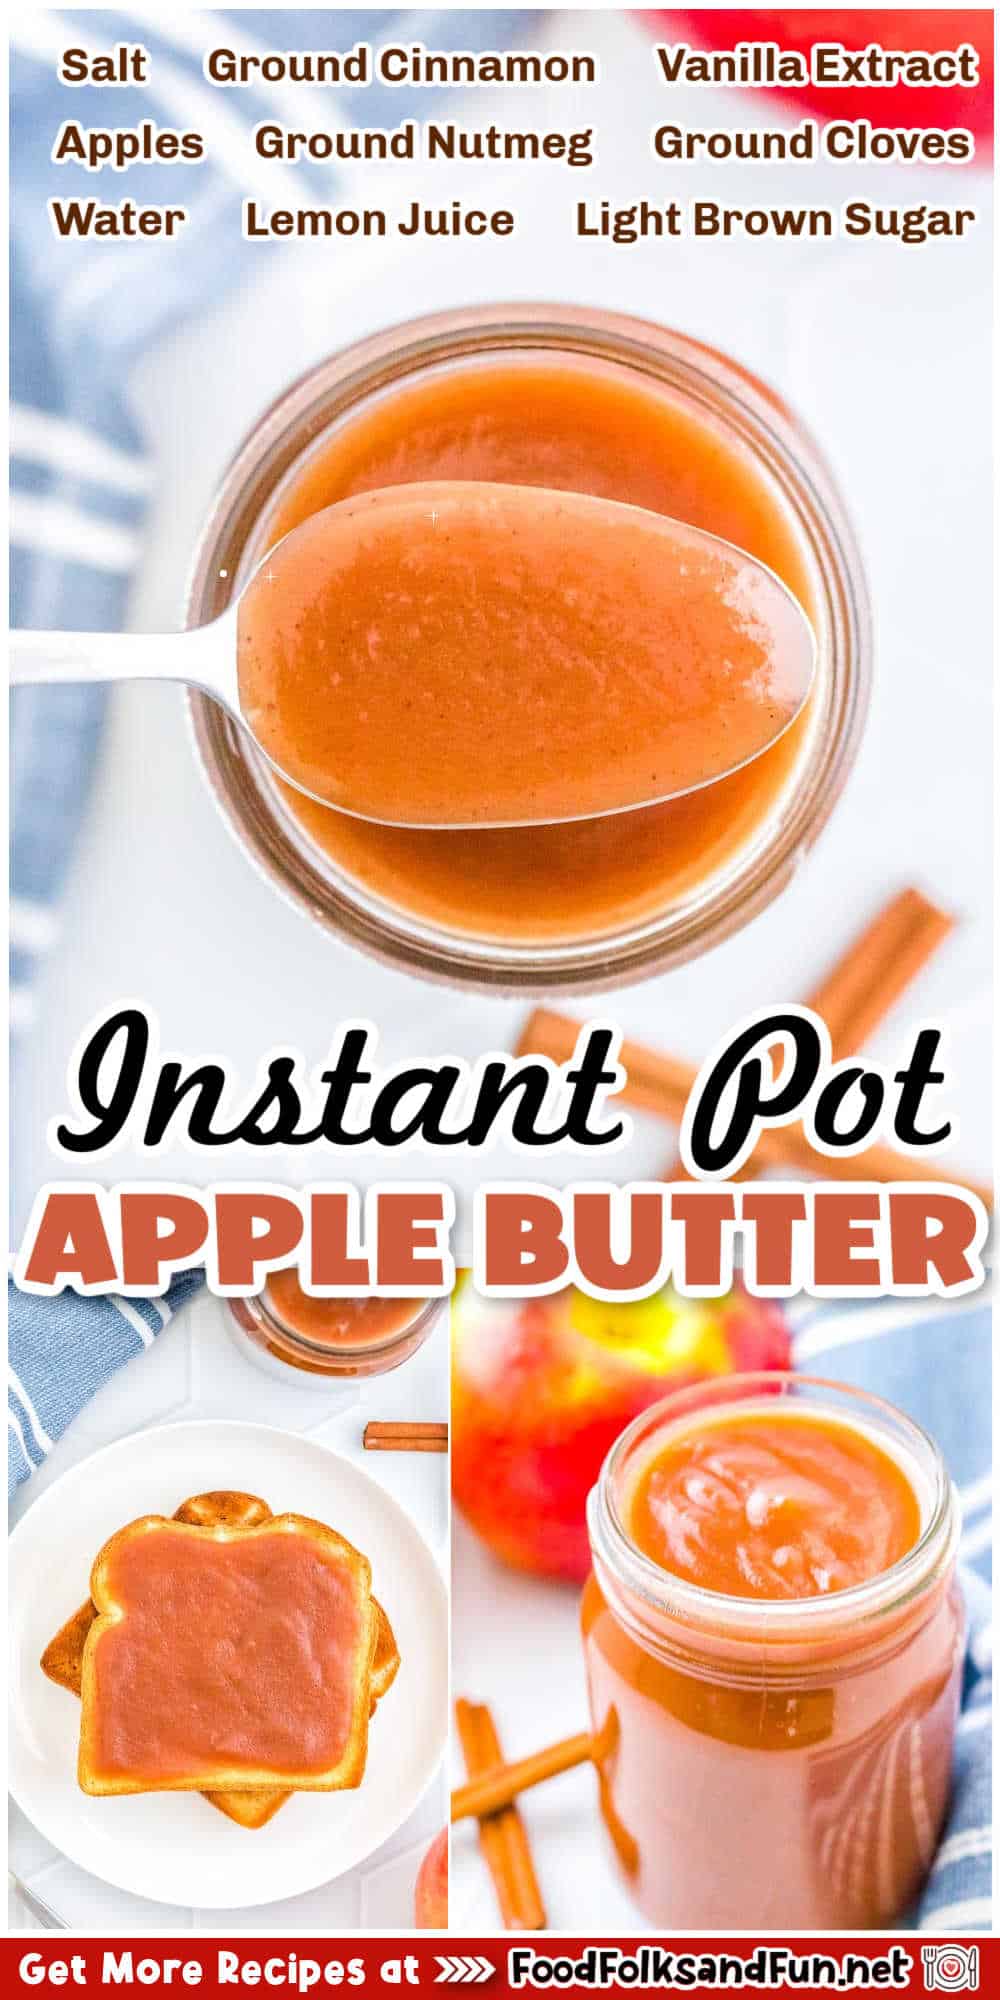 This Instant Pot Apple Butter Recipe is an easy version of the autumn classic. You’ll be enjoying this sweet, spiced, and slightly caramelized apple spread in no time with this pressure cooker recipe. via @foodfolksandfun